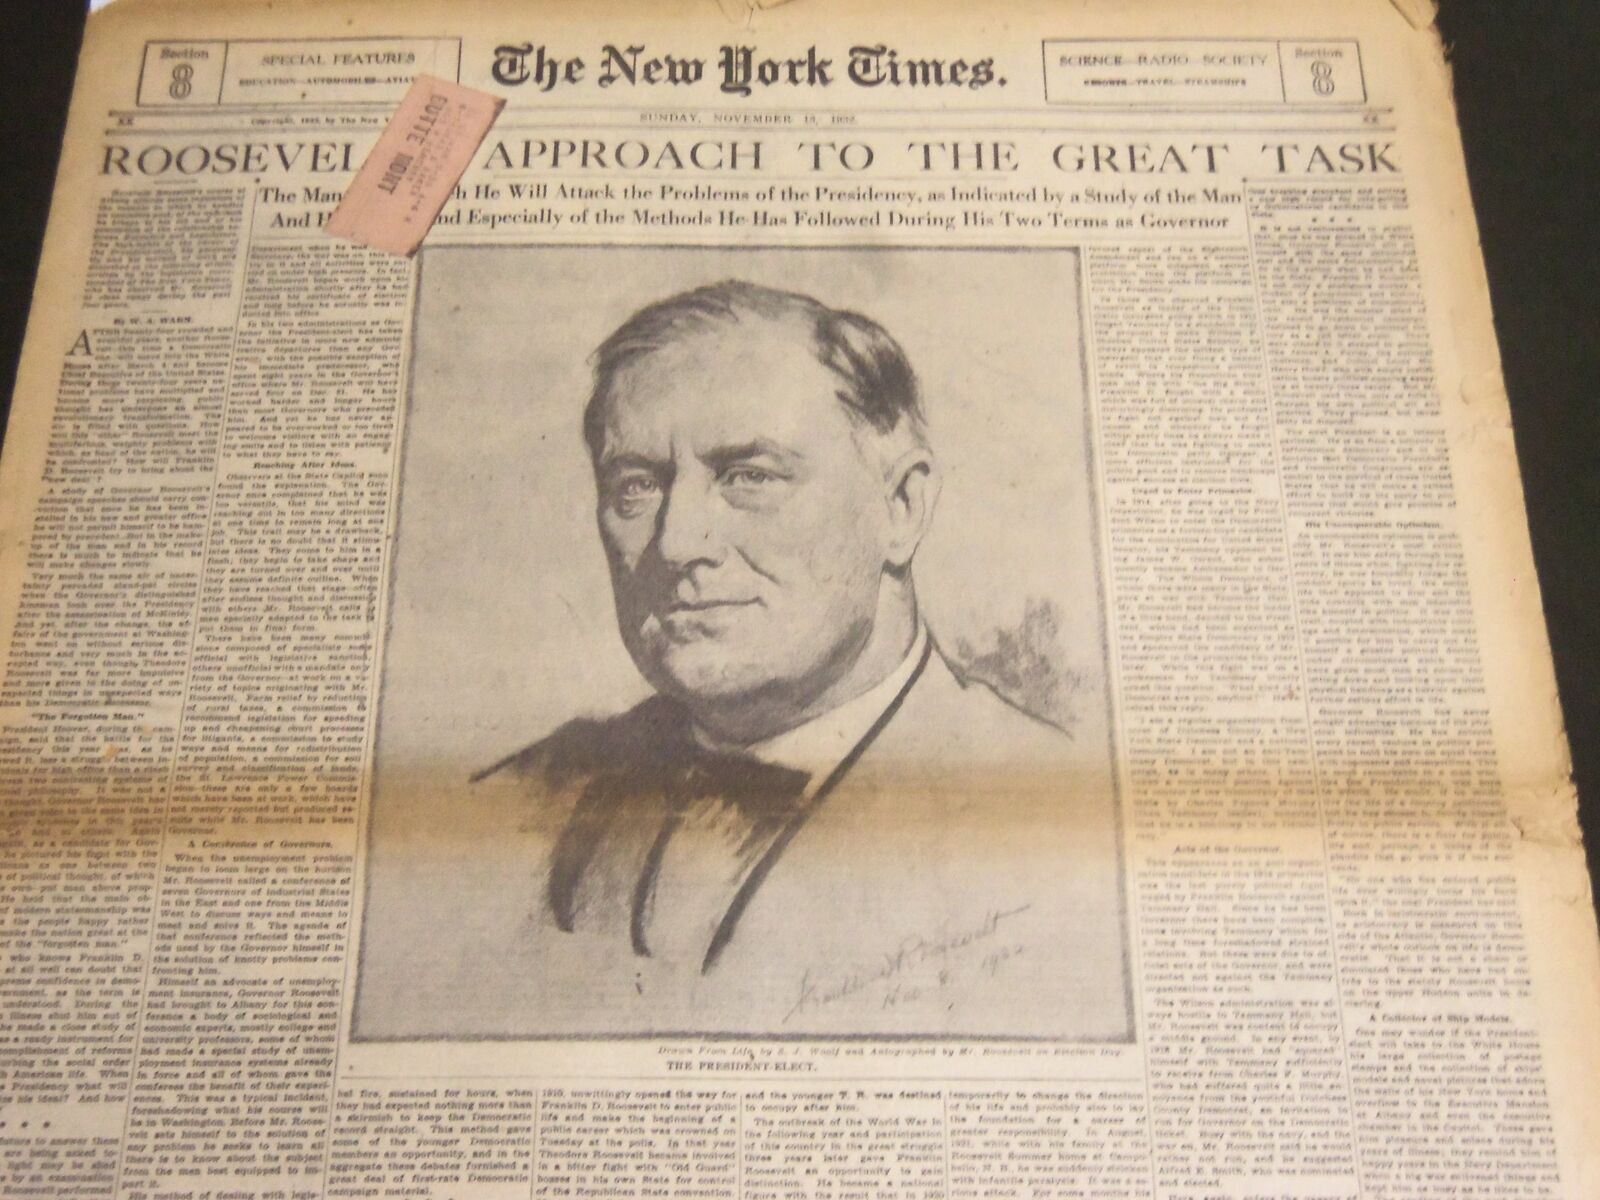 1932 NOV 13 NY TIMES SPECIAL FEATURES - ROOSEVELT\'S APPROACH TO TASK - NT 7092